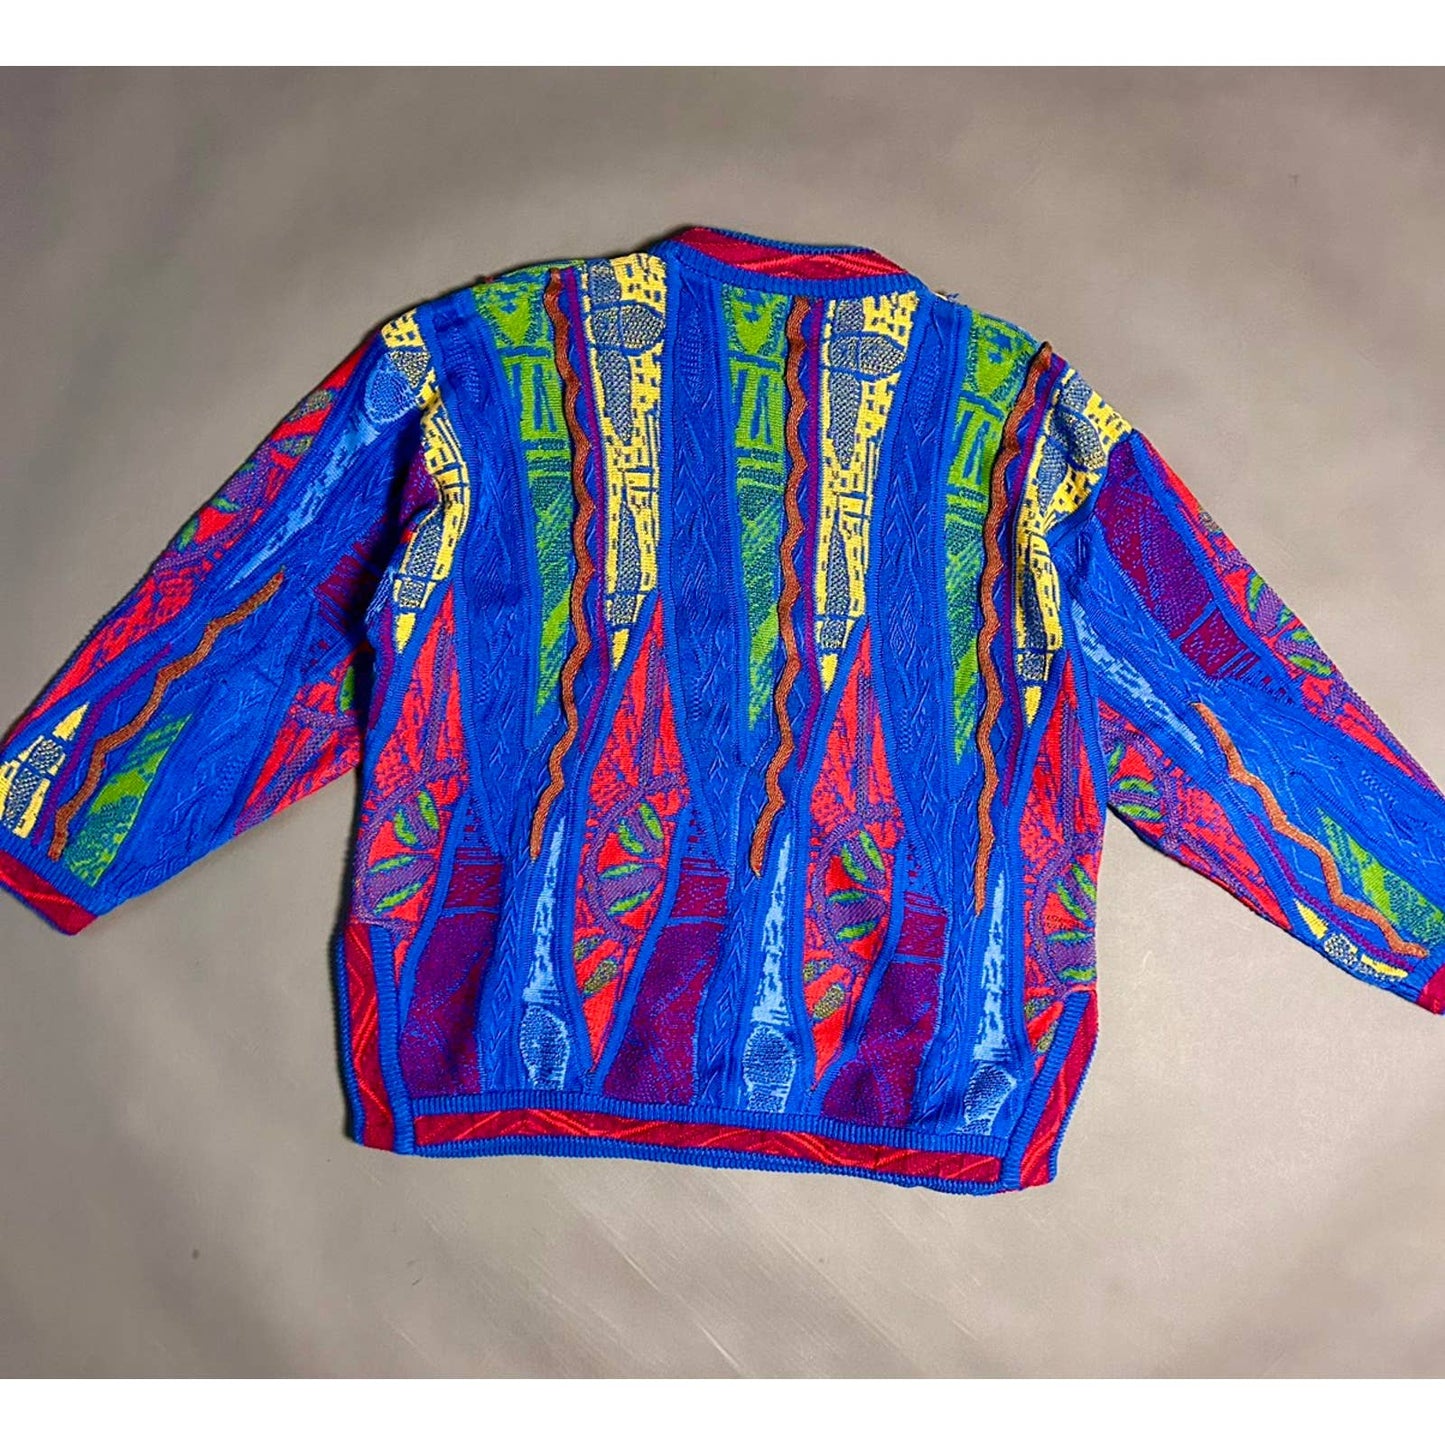 Carlo alberto vintage cable knit sweater Coogi style